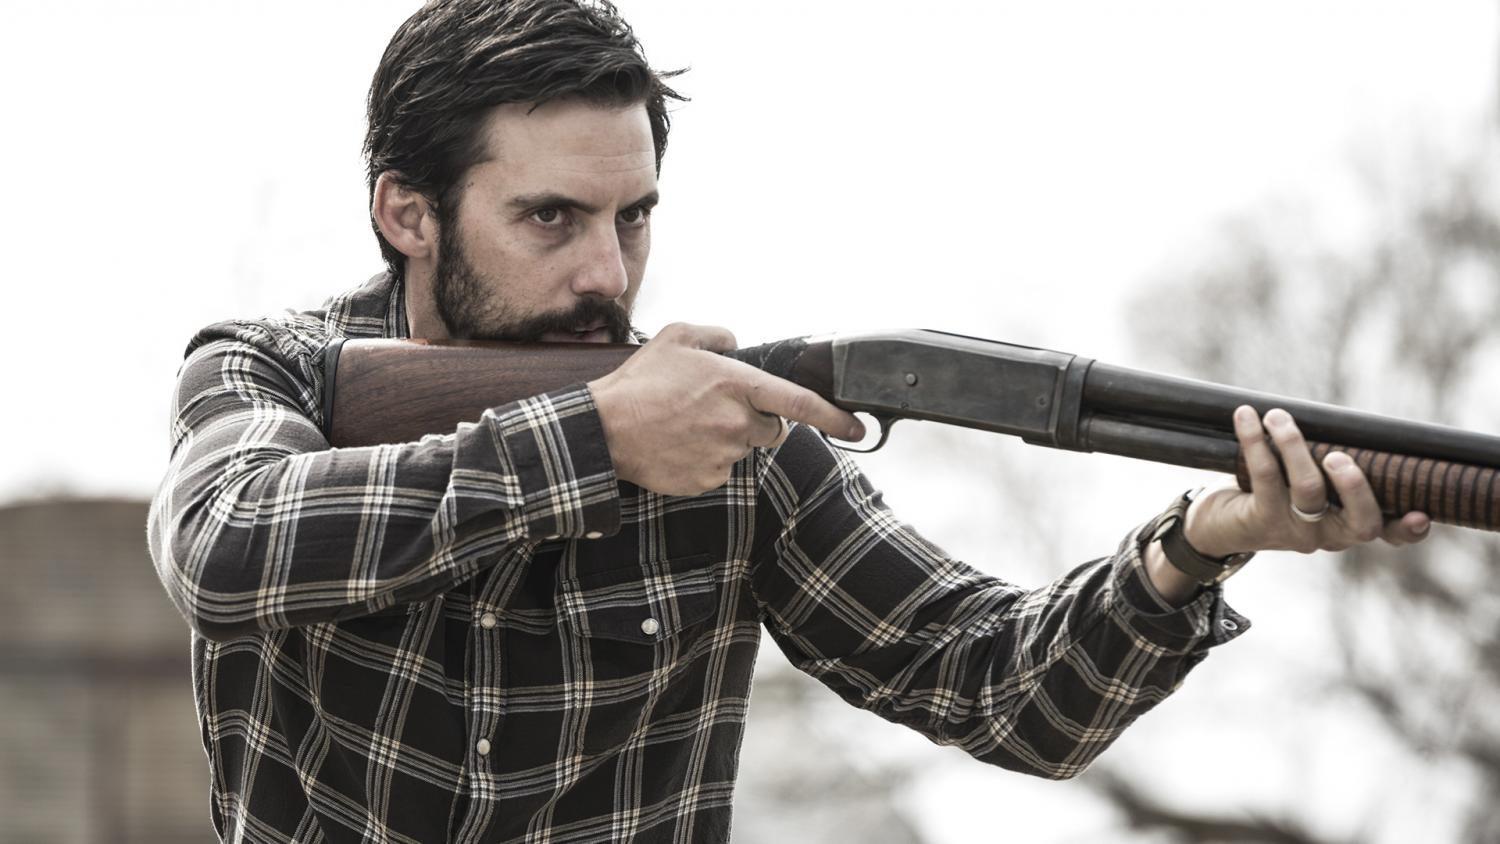 Milo Ventimiglia stars as the mysterious Jackson Pritchard living on the outskirts of Clay Staub’s new film, “Devil's Gate.”